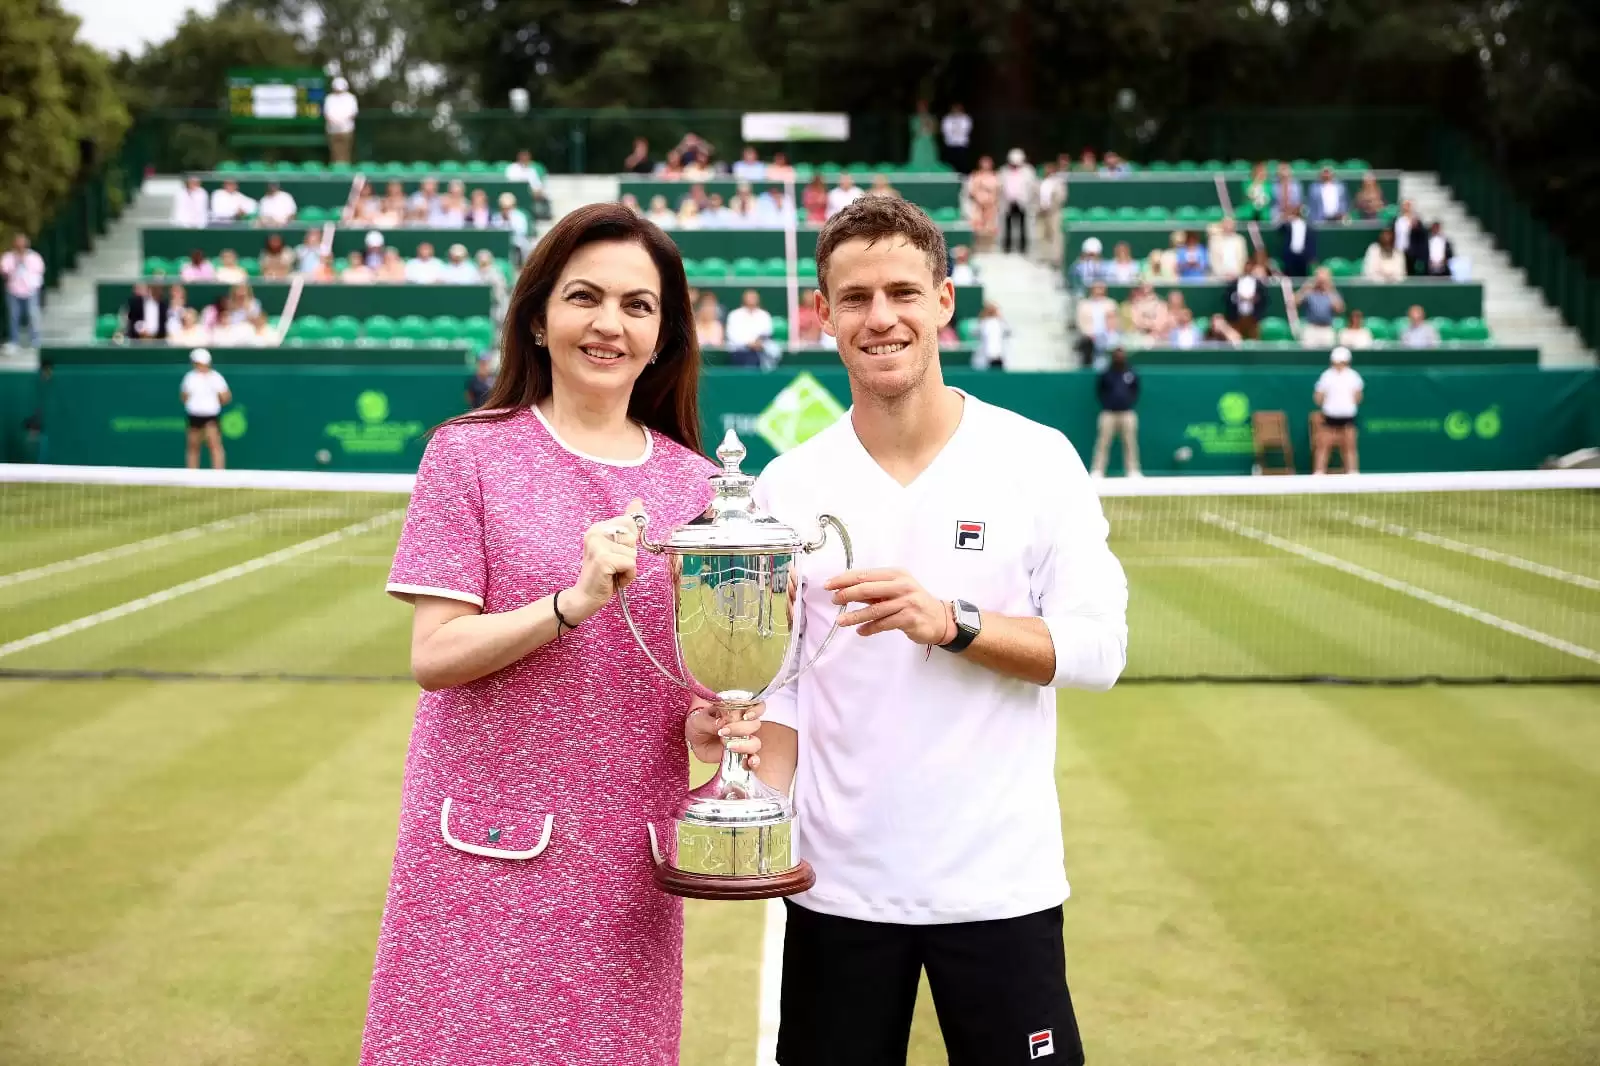 Photo caption: Mrs Nita. M. Ambani, Founder and Chairperson of Reliance Foundation presented the inaugural Reliance Foundation ESA Cup to Diego Schwartzman at The Boodles Tennis